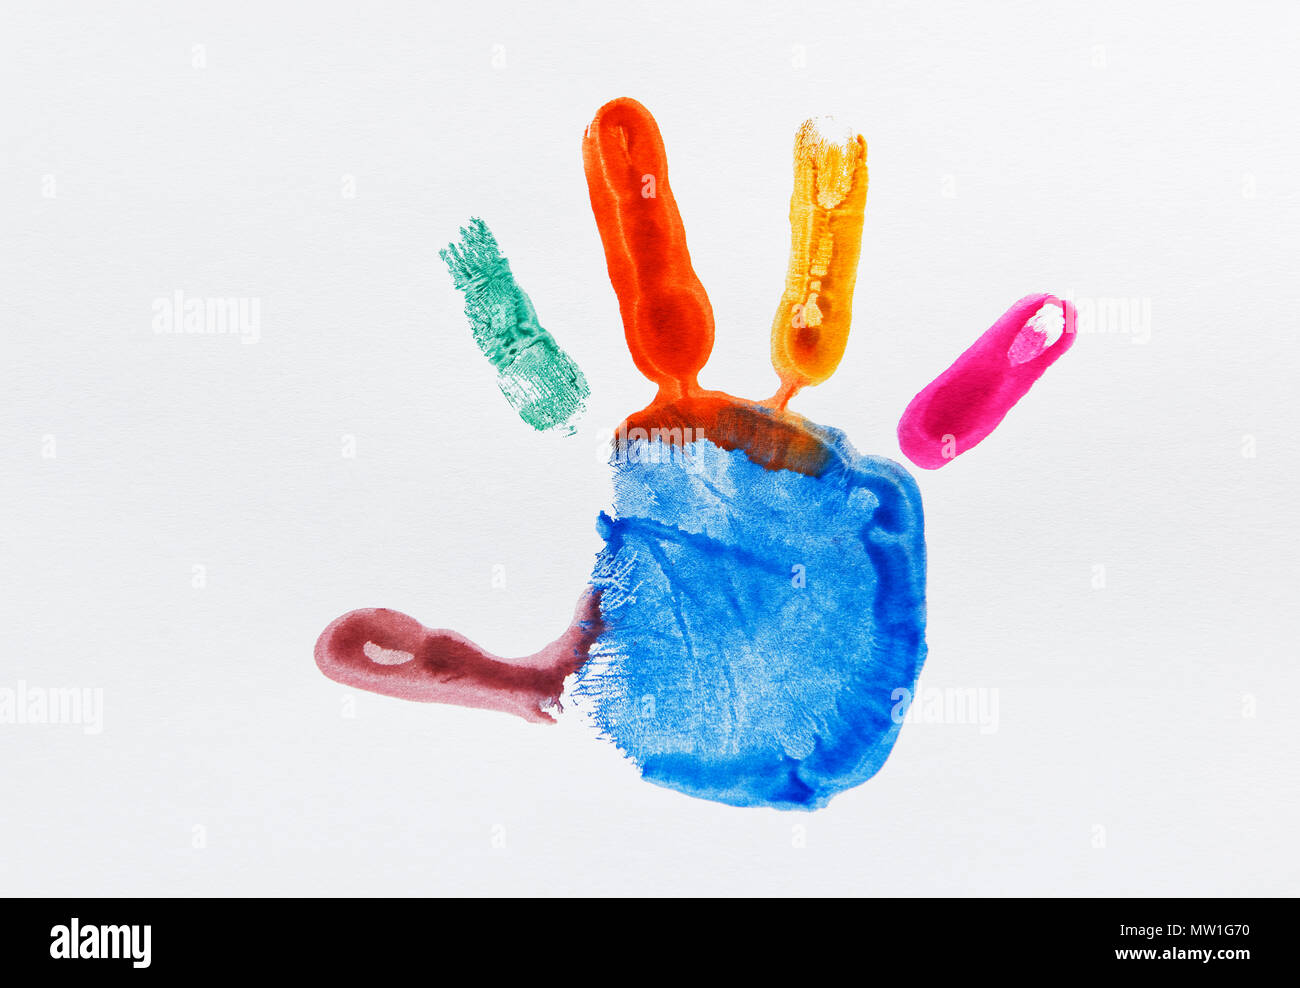 Colourful impression of a painted child's hand Stock Photo